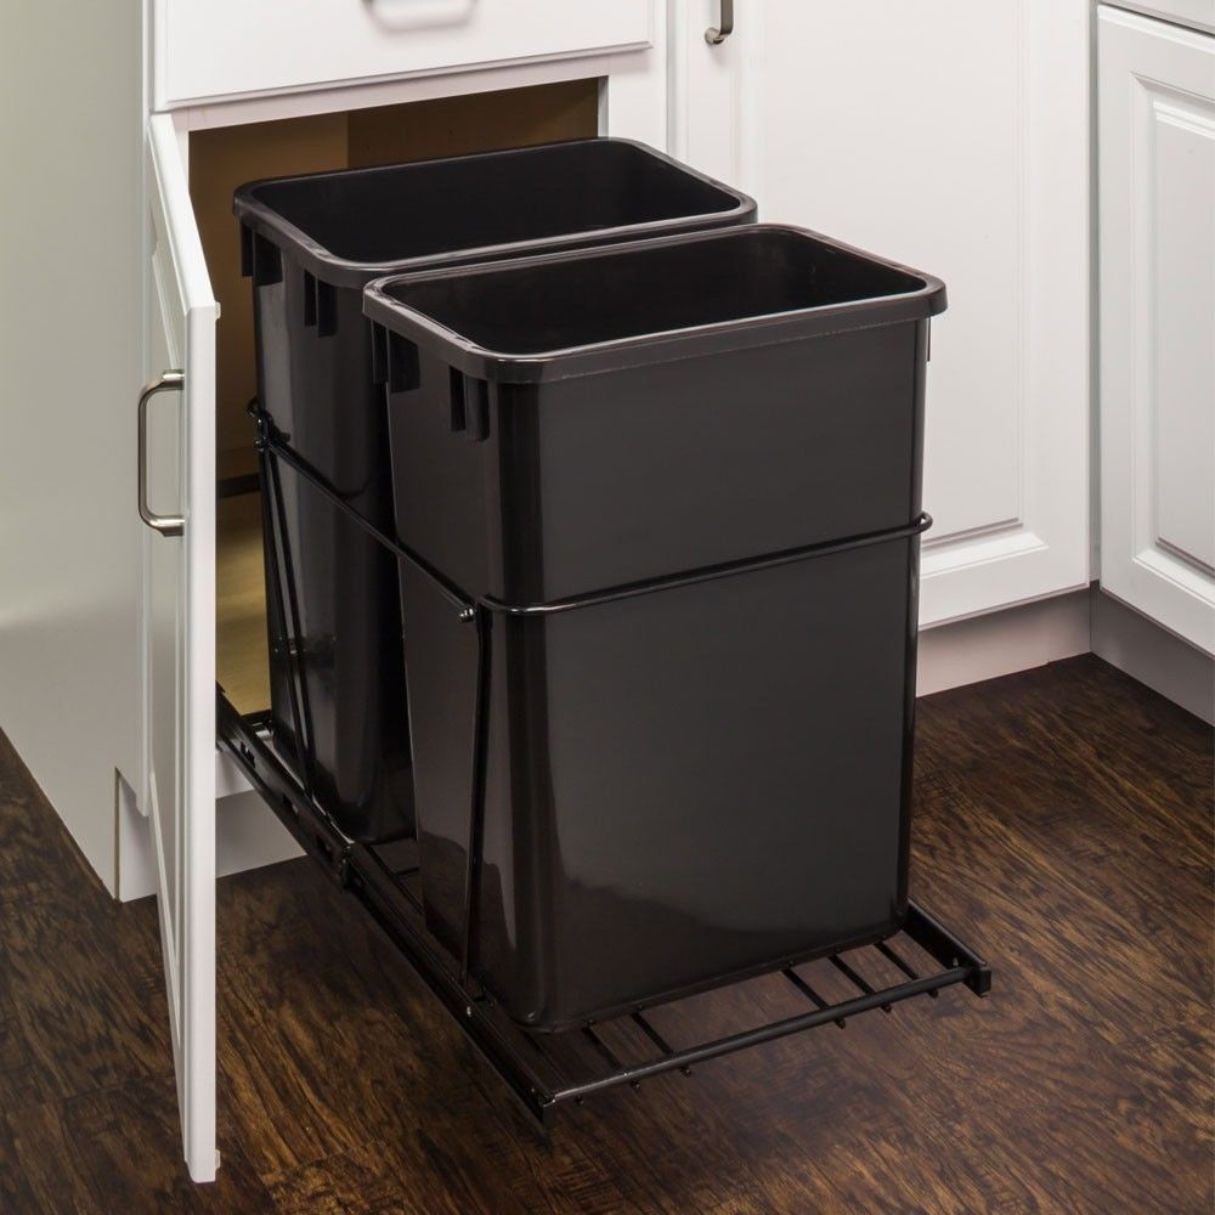 What Size Cabinet For Trash Can